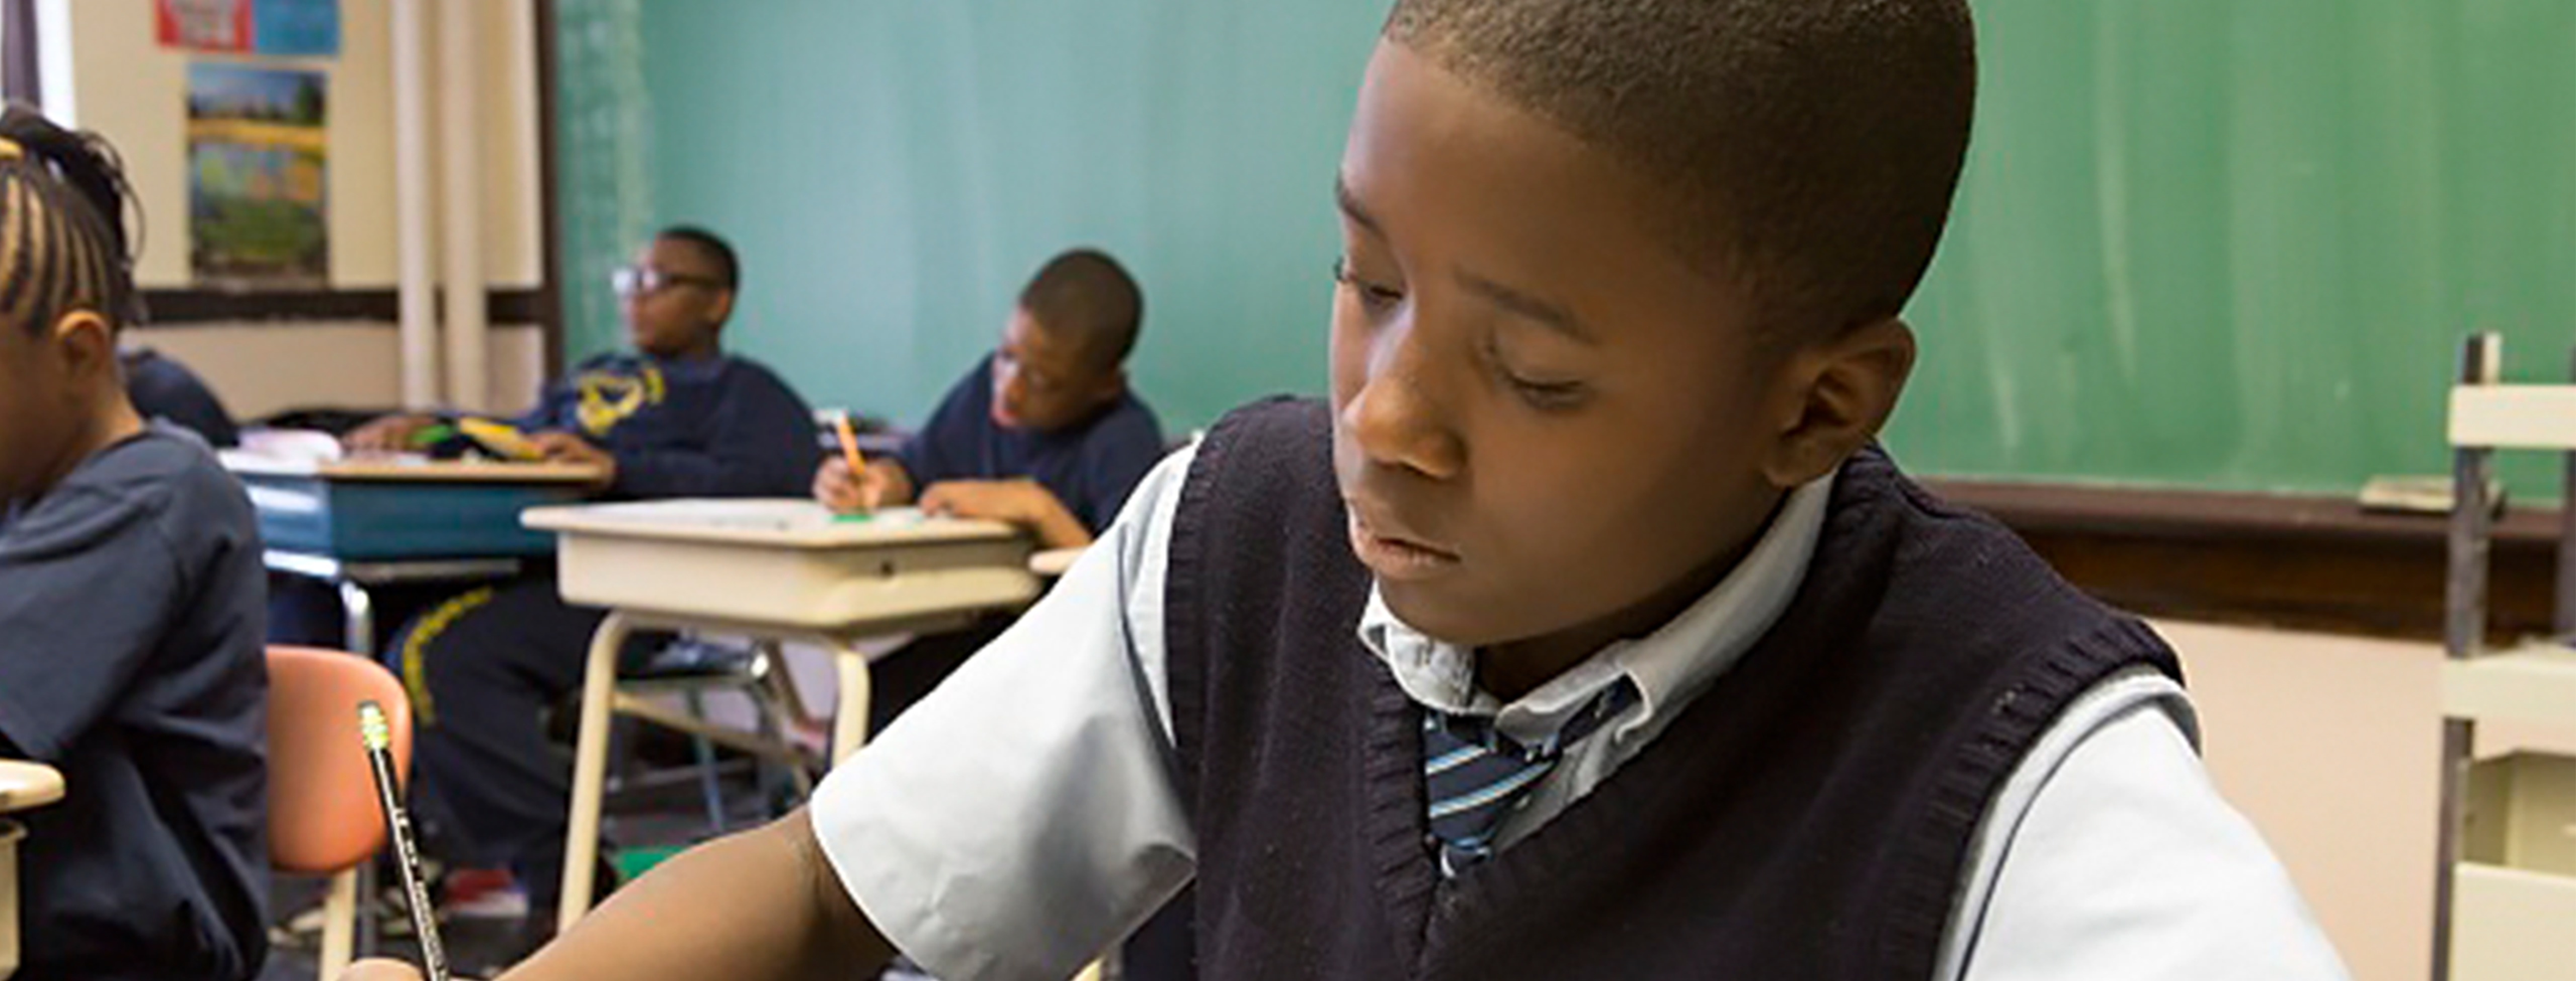 a dark-skinned boy with very short hair and a navy blue vest over a white short-sleeved shirt and tie sits at a desk in a classroom, writing with a pencil on paper. there are four other young people and a green chalkboard in the background.